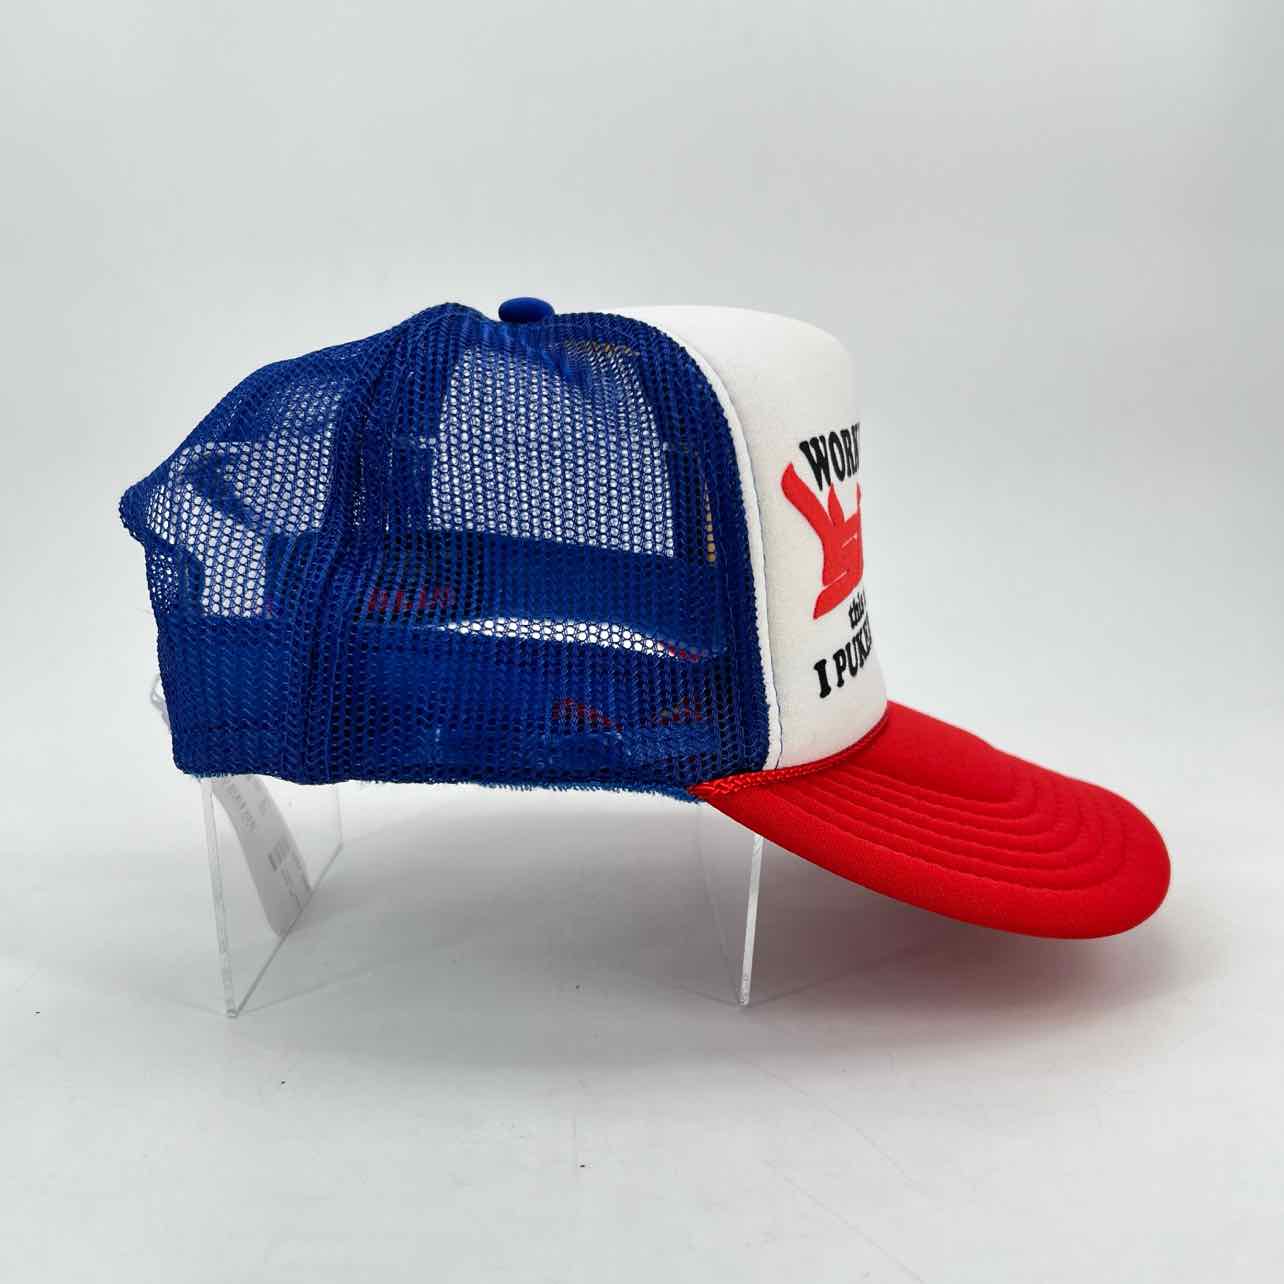 Sicko Trucker Hat &quot;PUKED ON LAUNDRY&quot; New RED BLUE Size OS